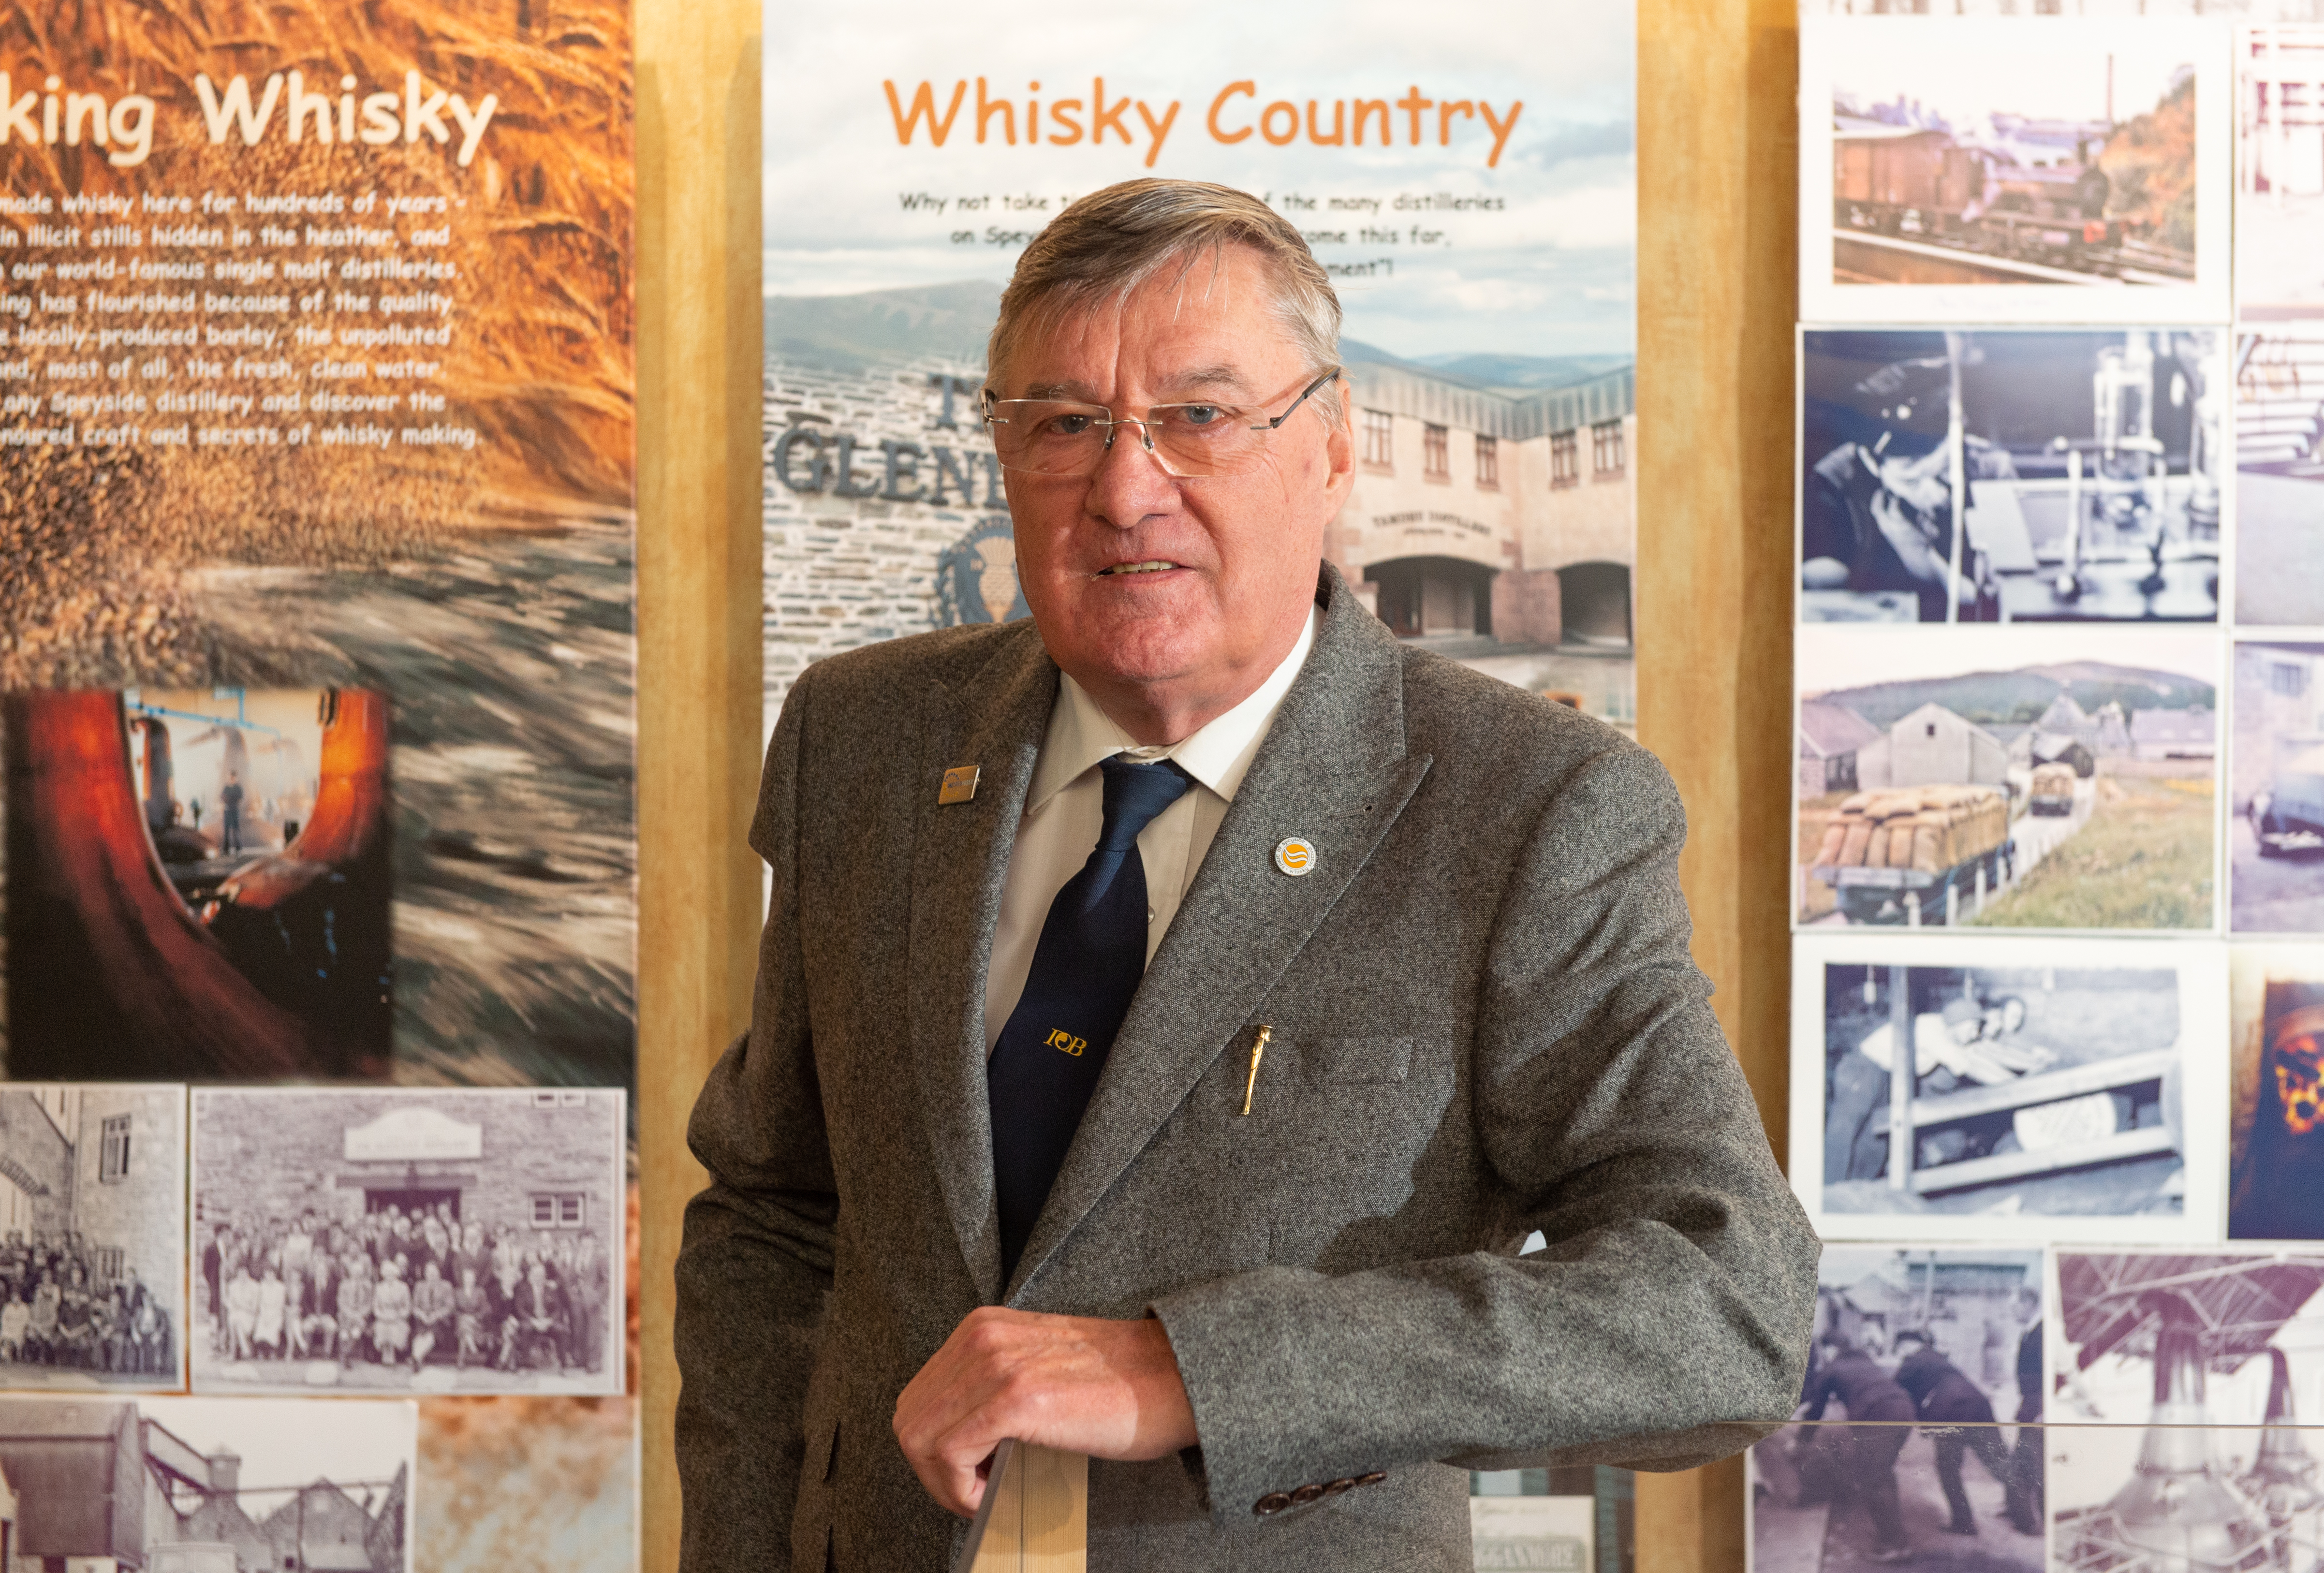 Retired whisky worker Bill Morgan pictured at Speyside Visitor Centre. Picture by Jason Hedges